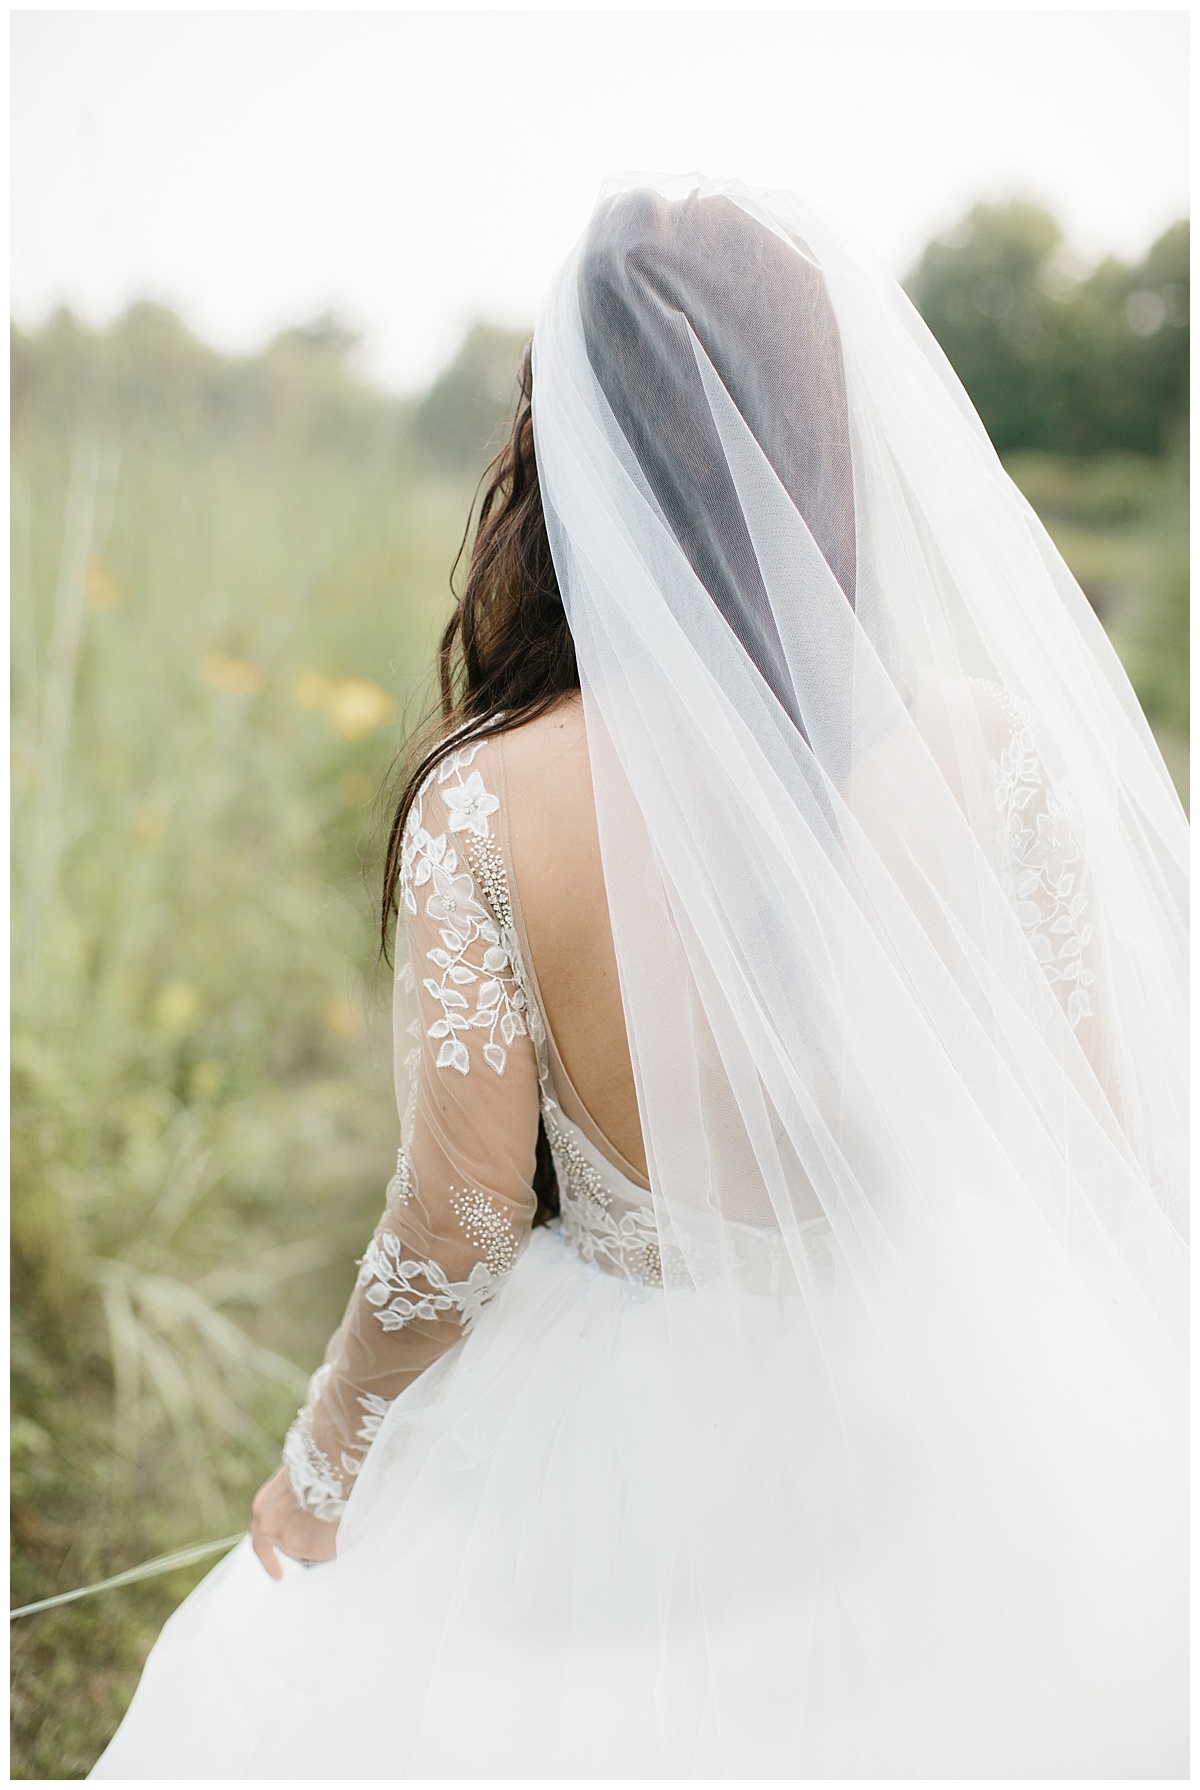 bride, hayley paige, ballgown, veil, romantic, greenery, floral, wausau, greenwood hills country club, central wisconsin wedding photographer, madison wedding photographer, midwest wedding photographer